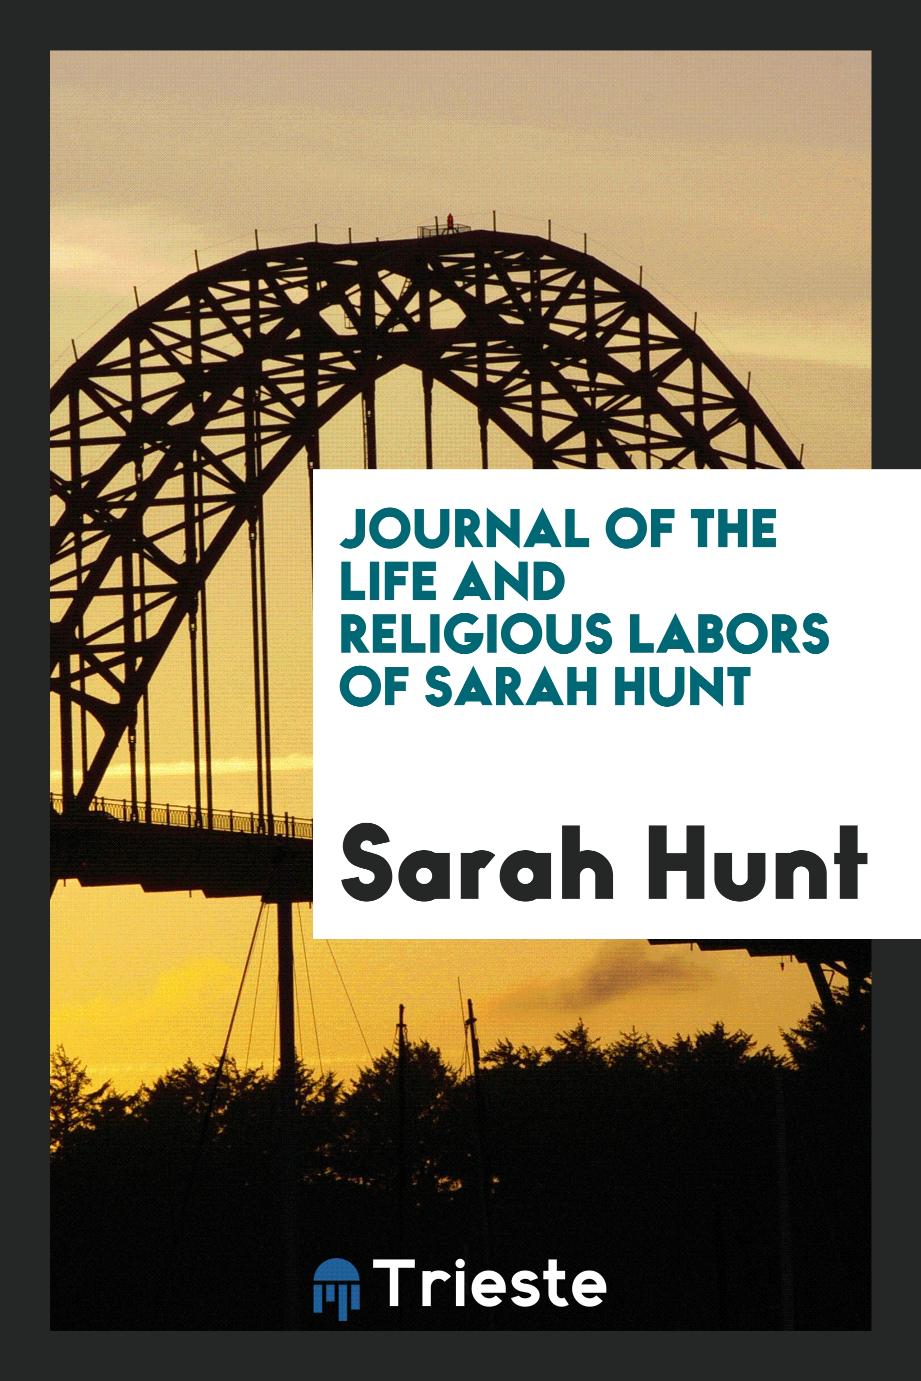 Journal of the Life and Religious Labors of Sarah Hunt